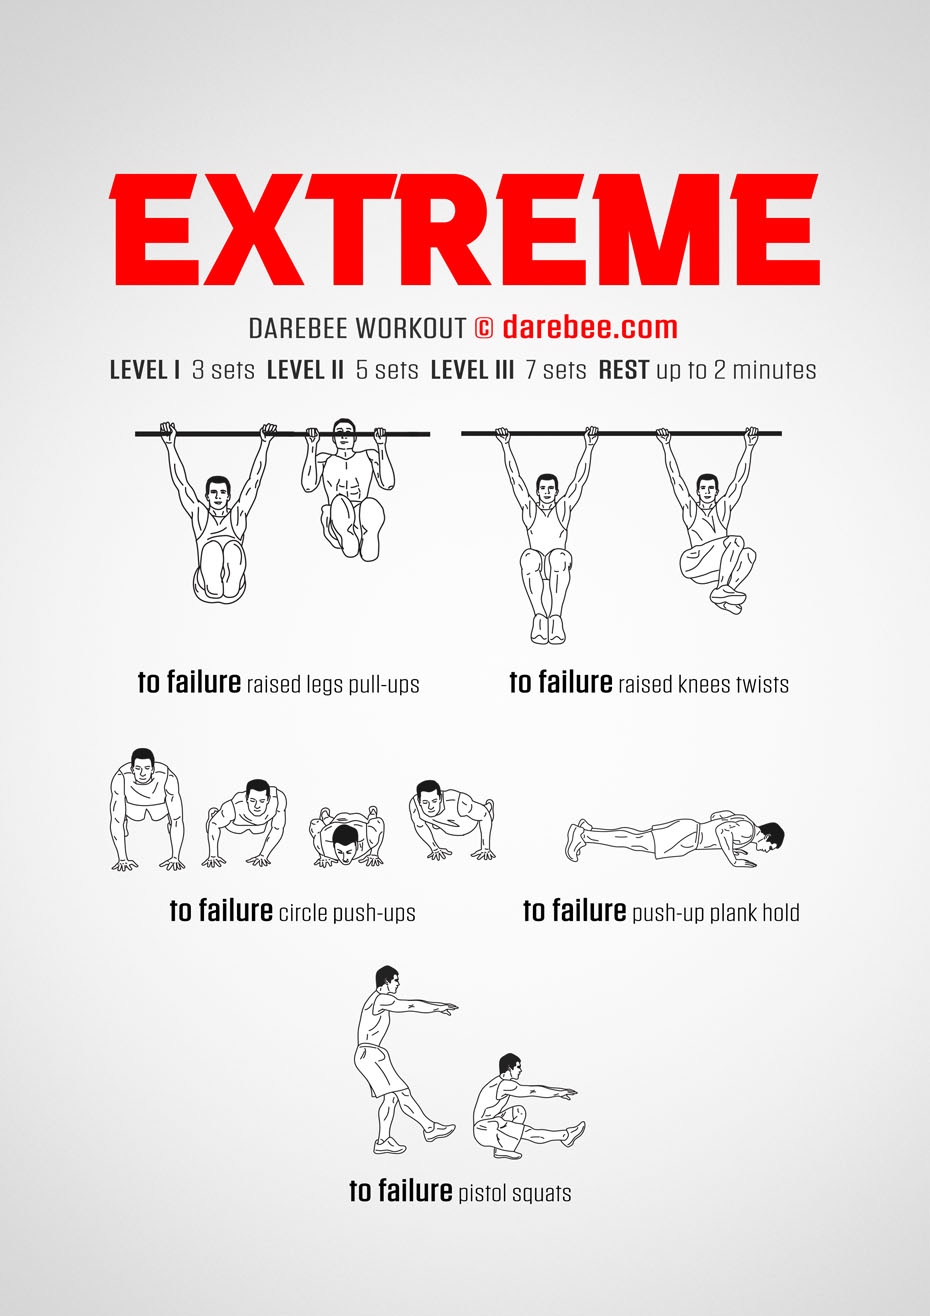 https://darebee.com/images/workouts/extreme-workout.jpg